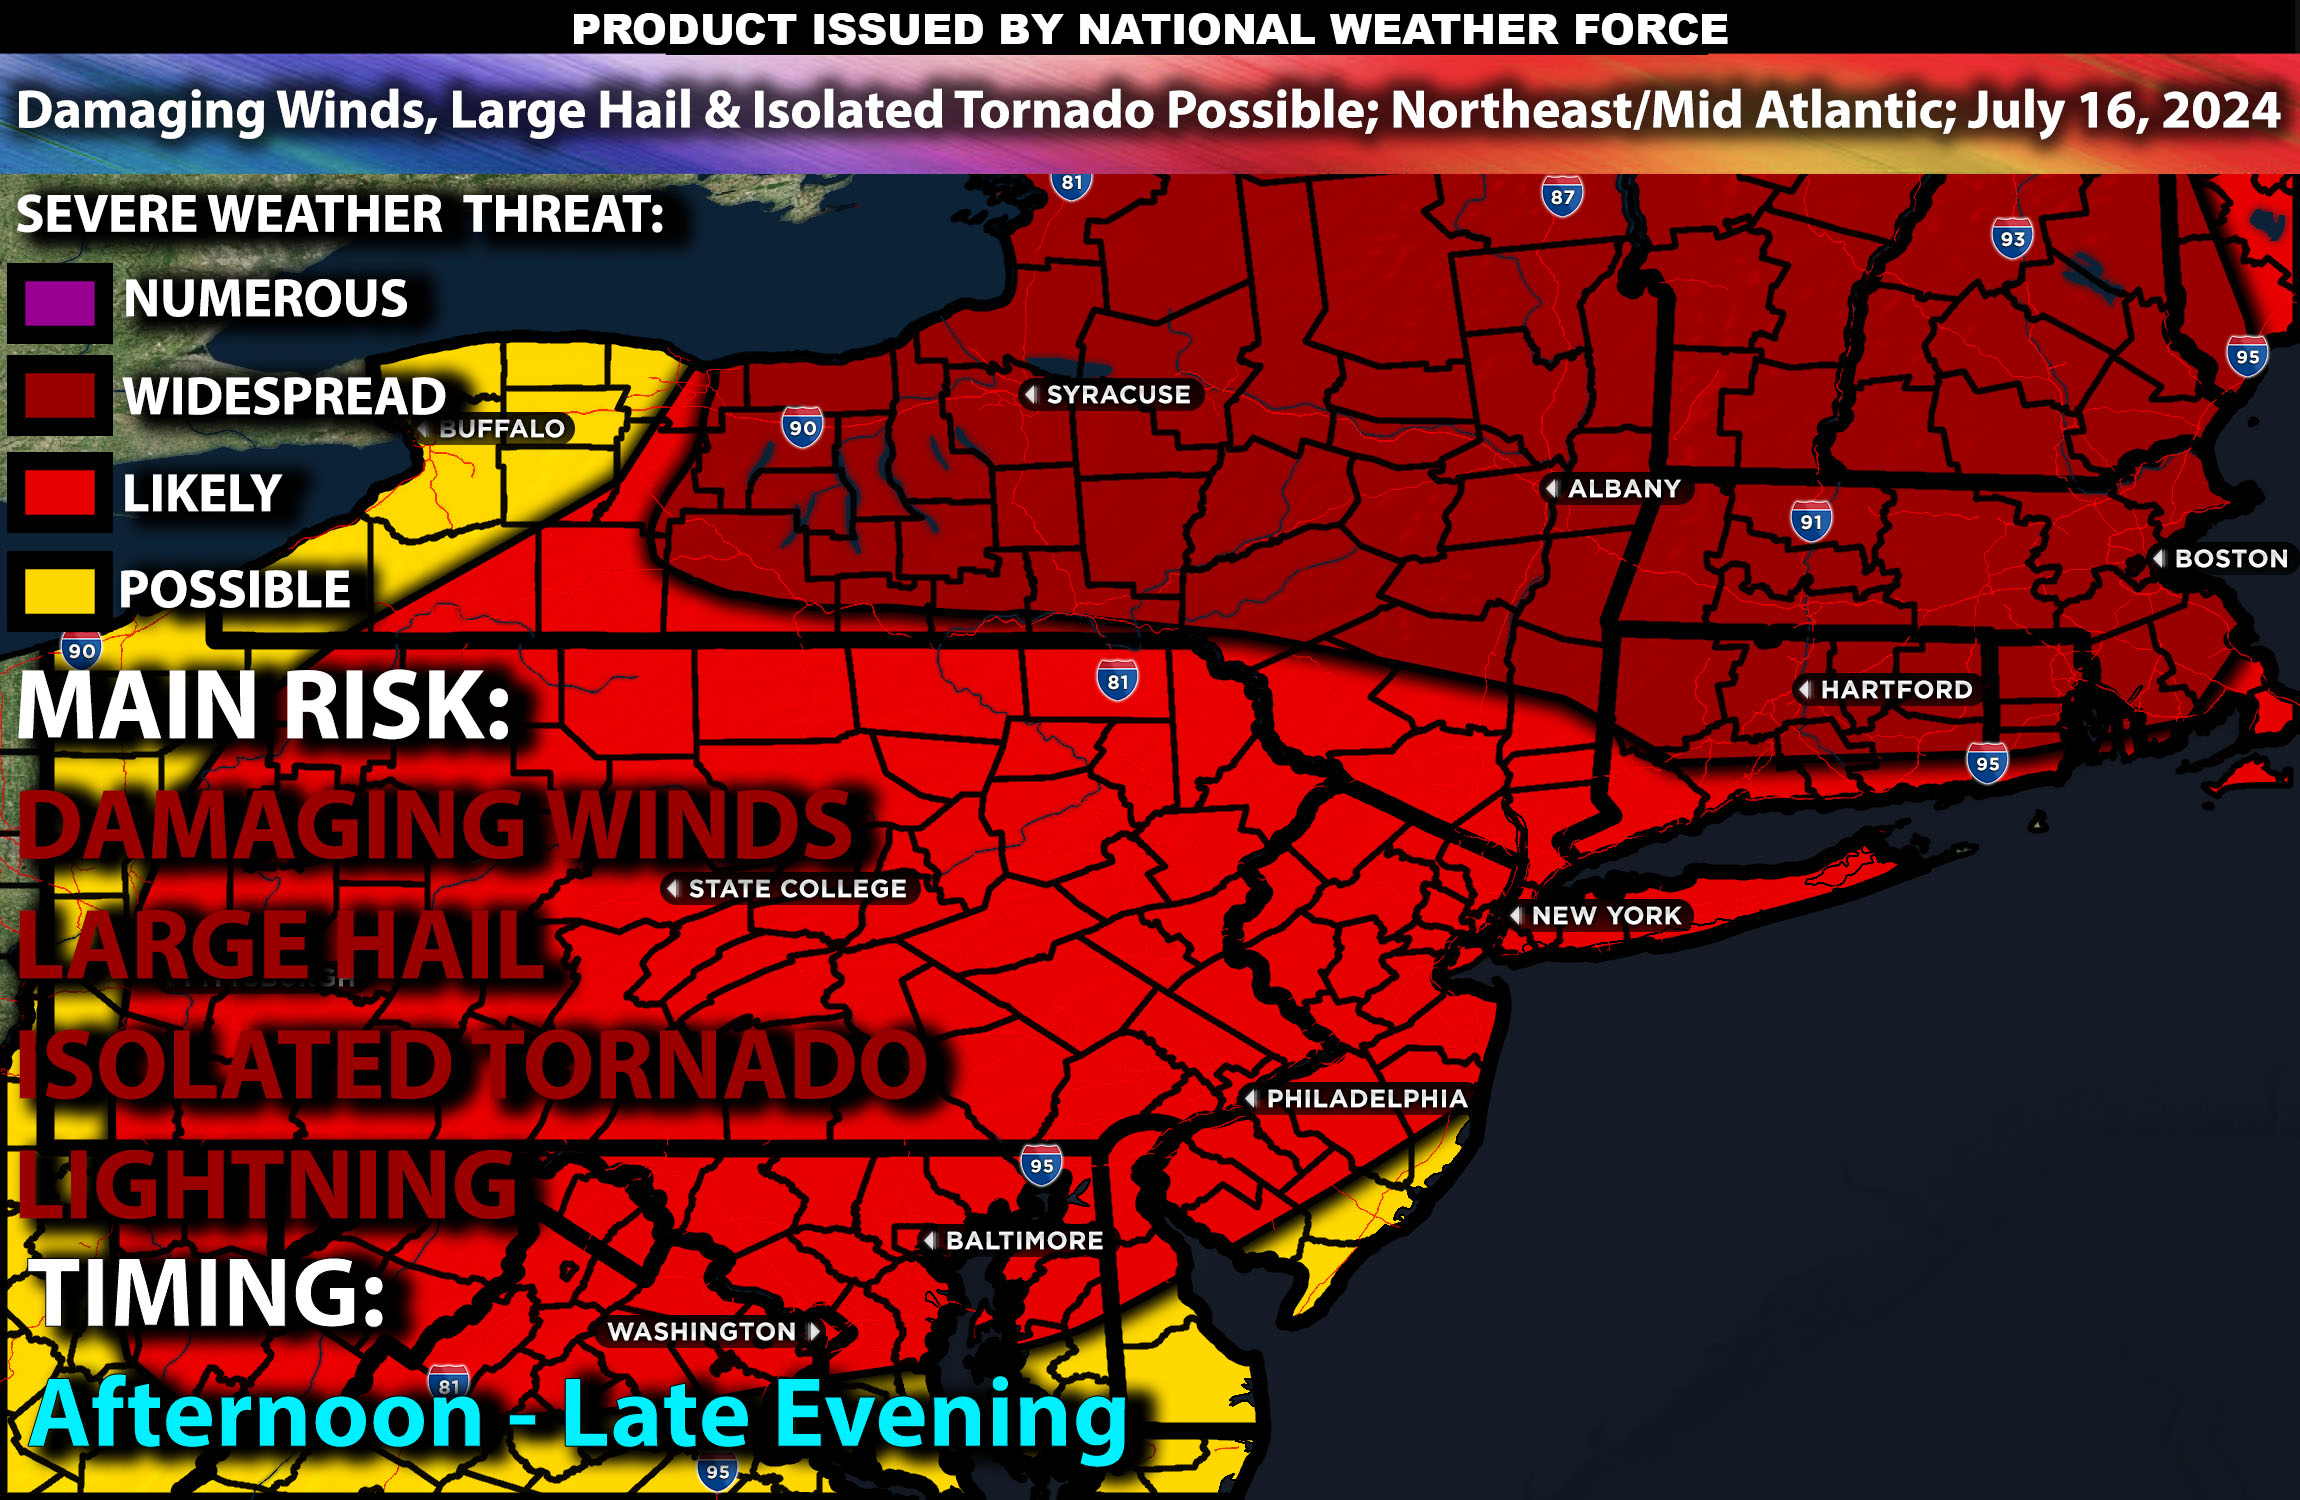 Damaging Winds, Large Hail & Isolated Tornadoes Possible; Northeast/Mid Atlantic; July 16, 2024